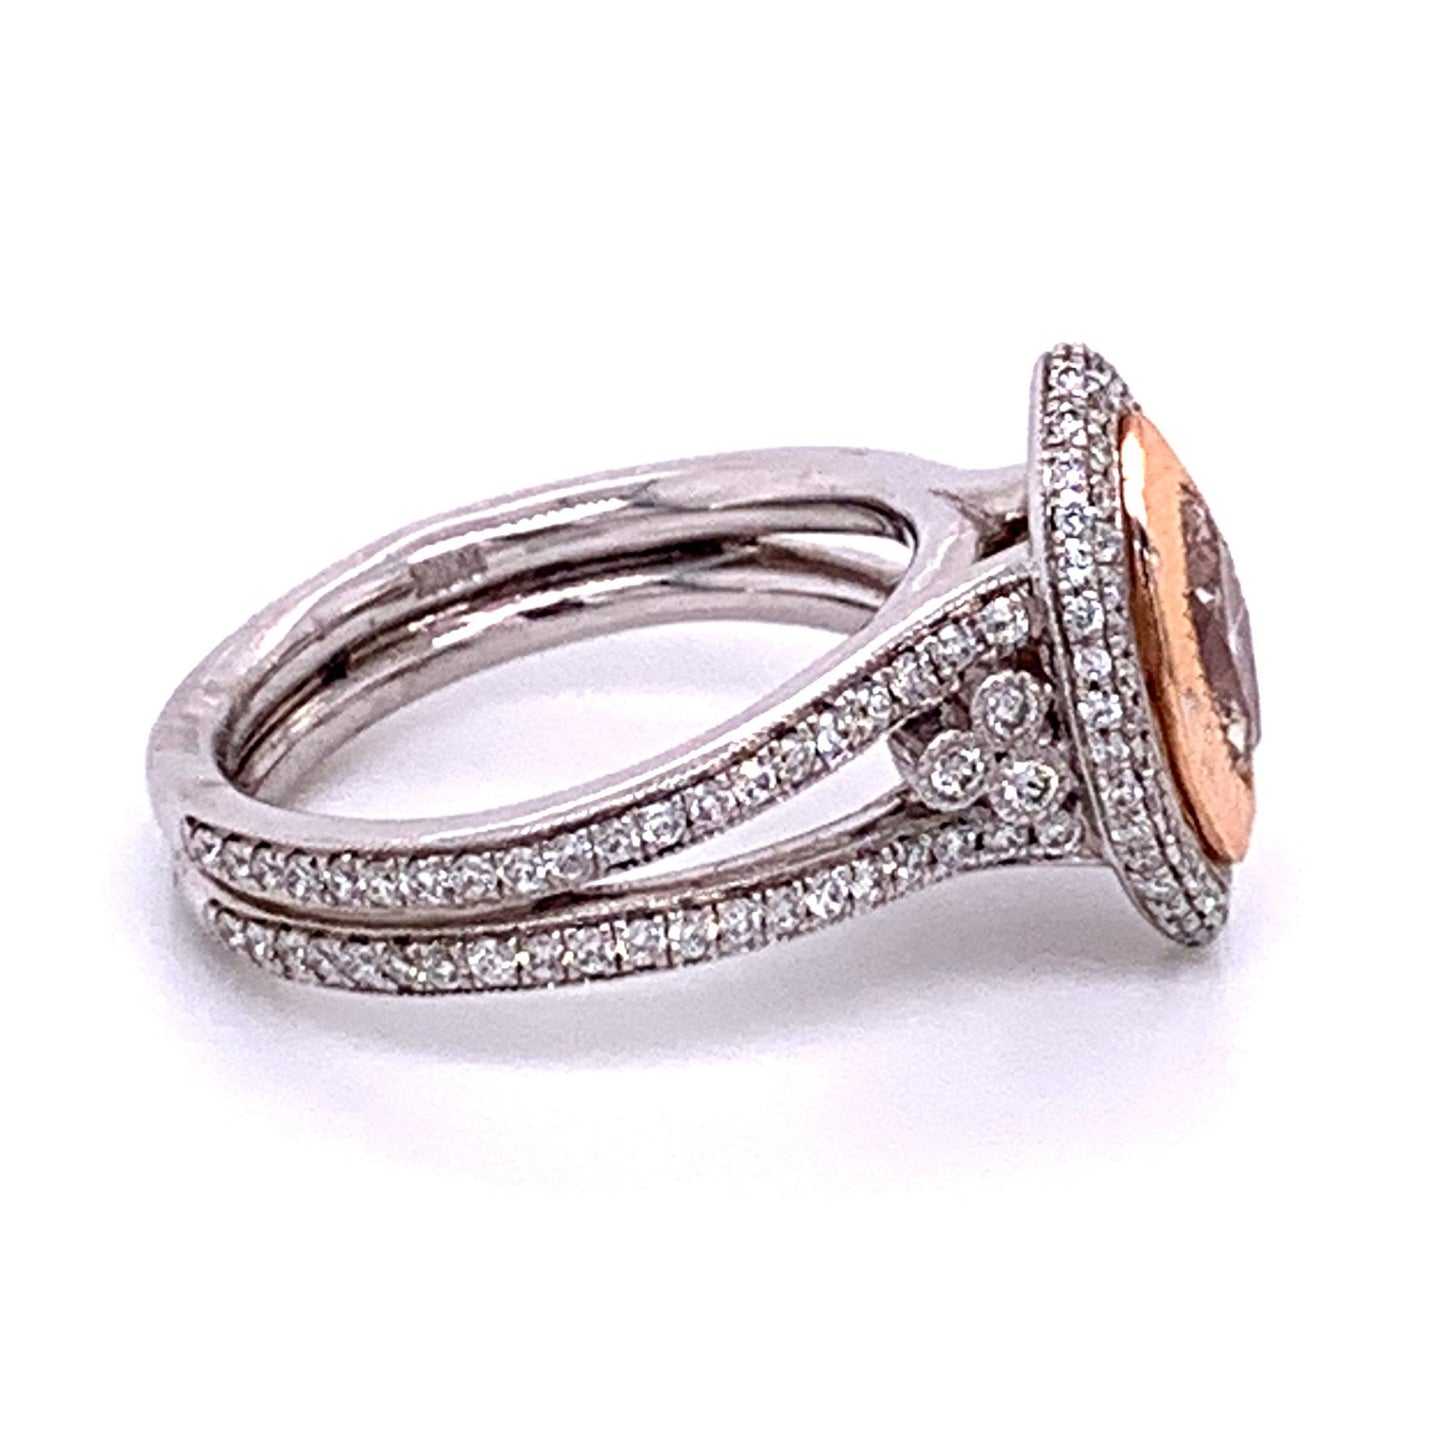 Fancy Marquise Halo Diamond Ring in 14K Two-Tone Gold